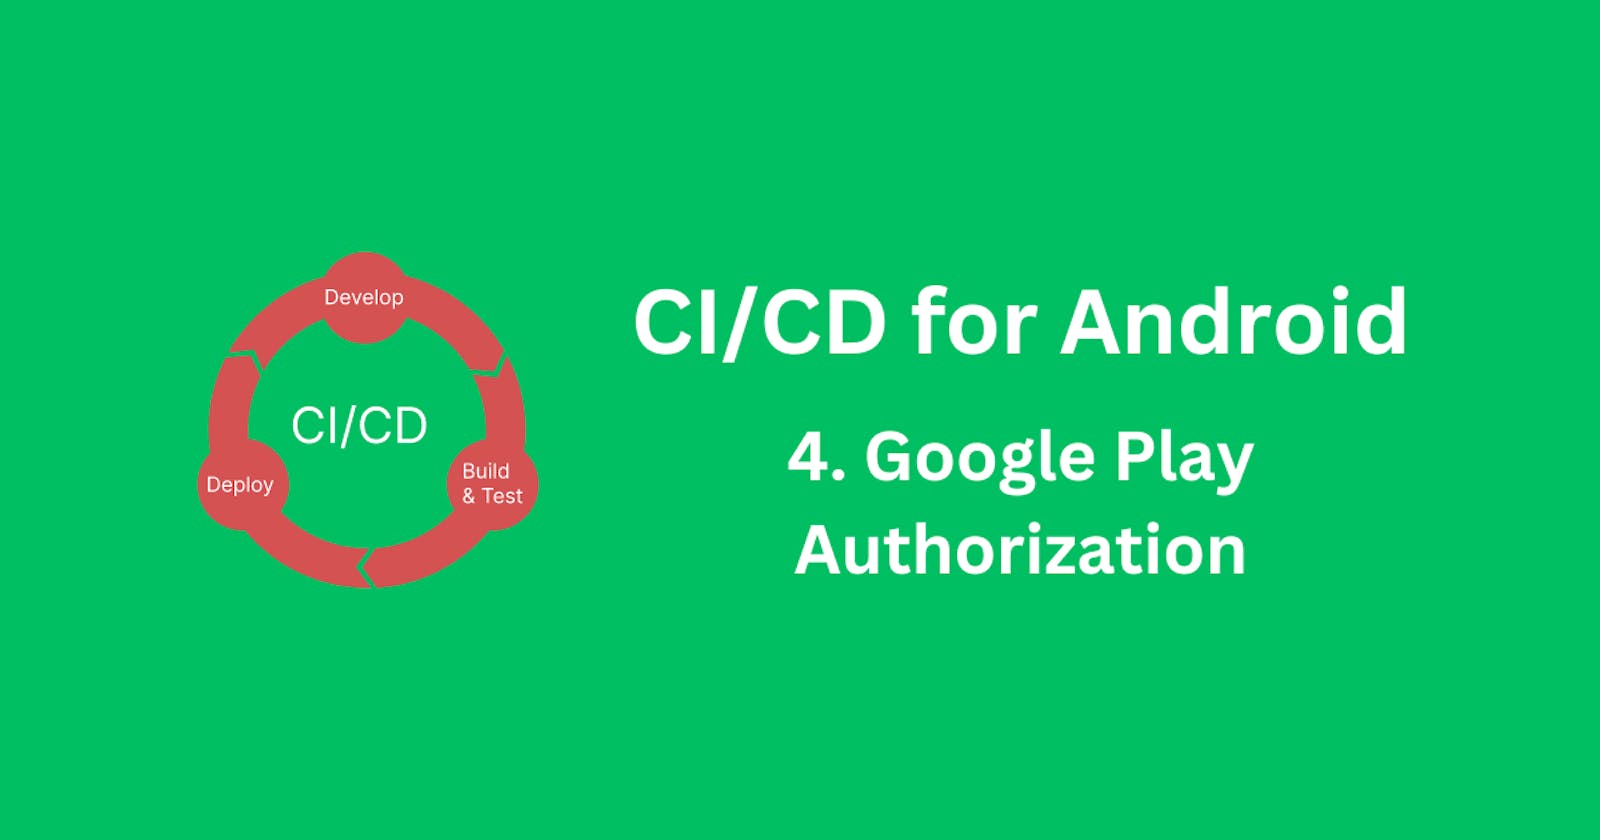 CI/CD for Android - Google Play Authorization